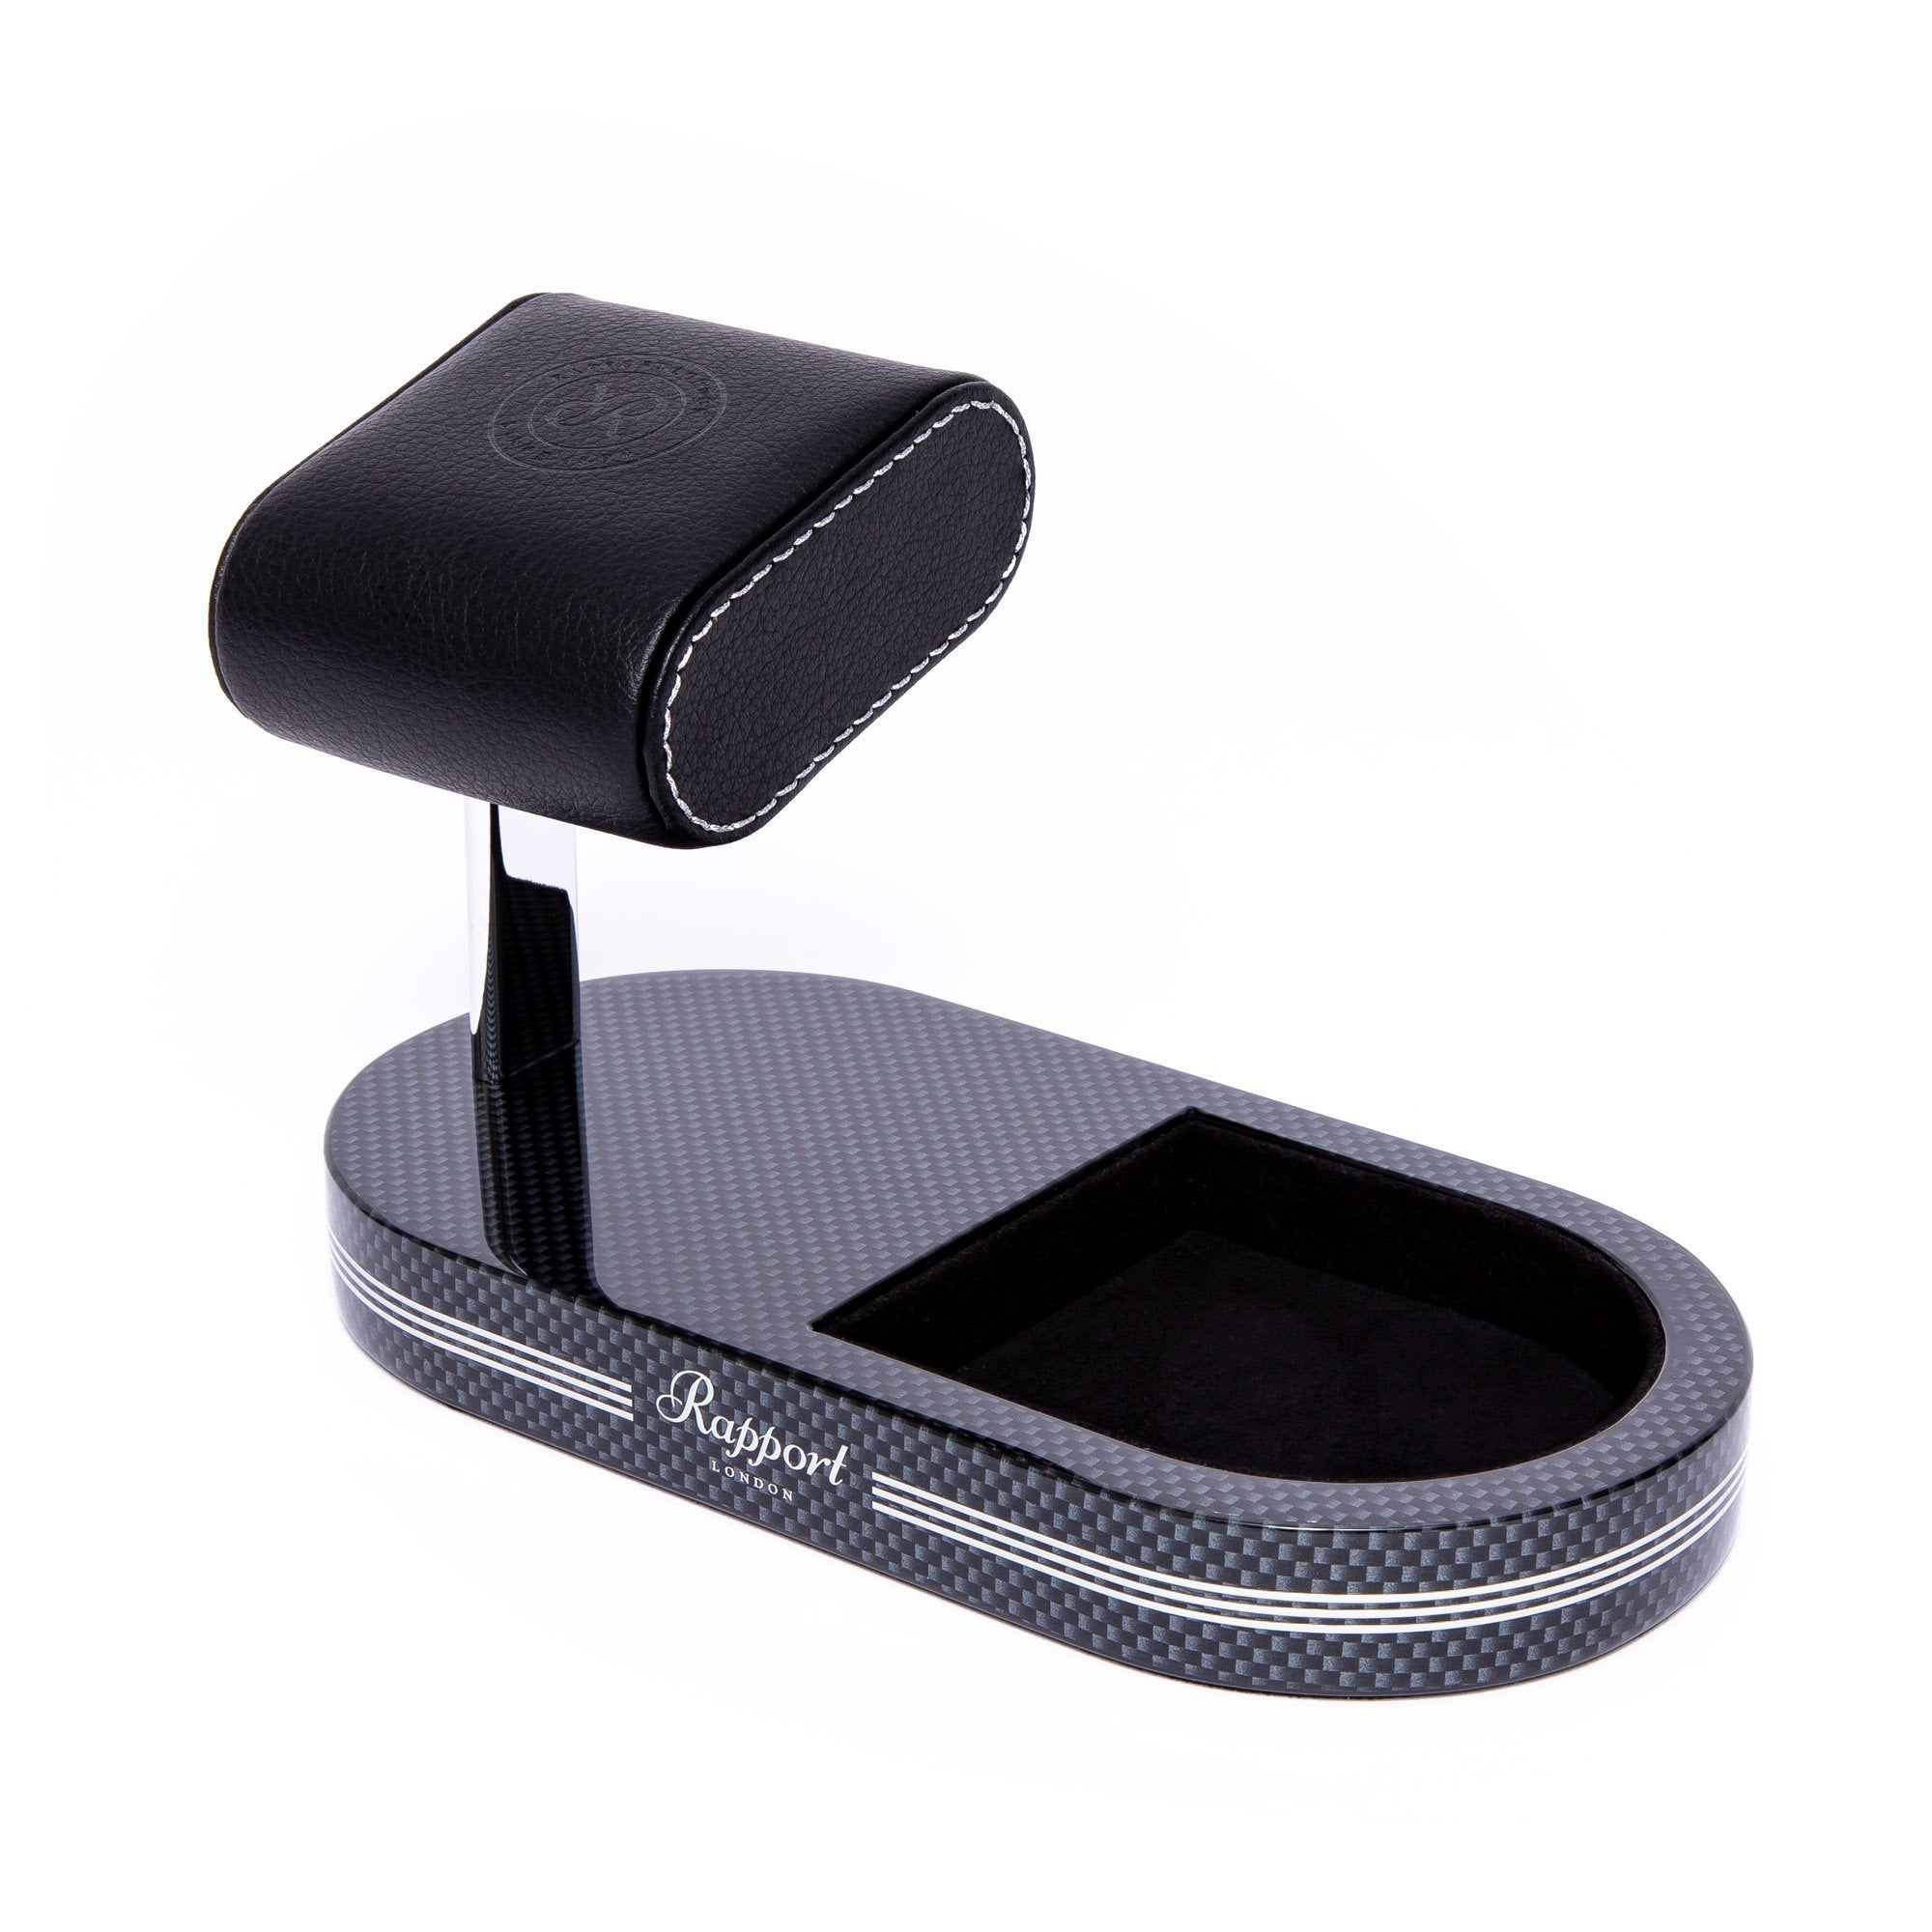 Formula Watch Stand With Tray - Carbon Fibre